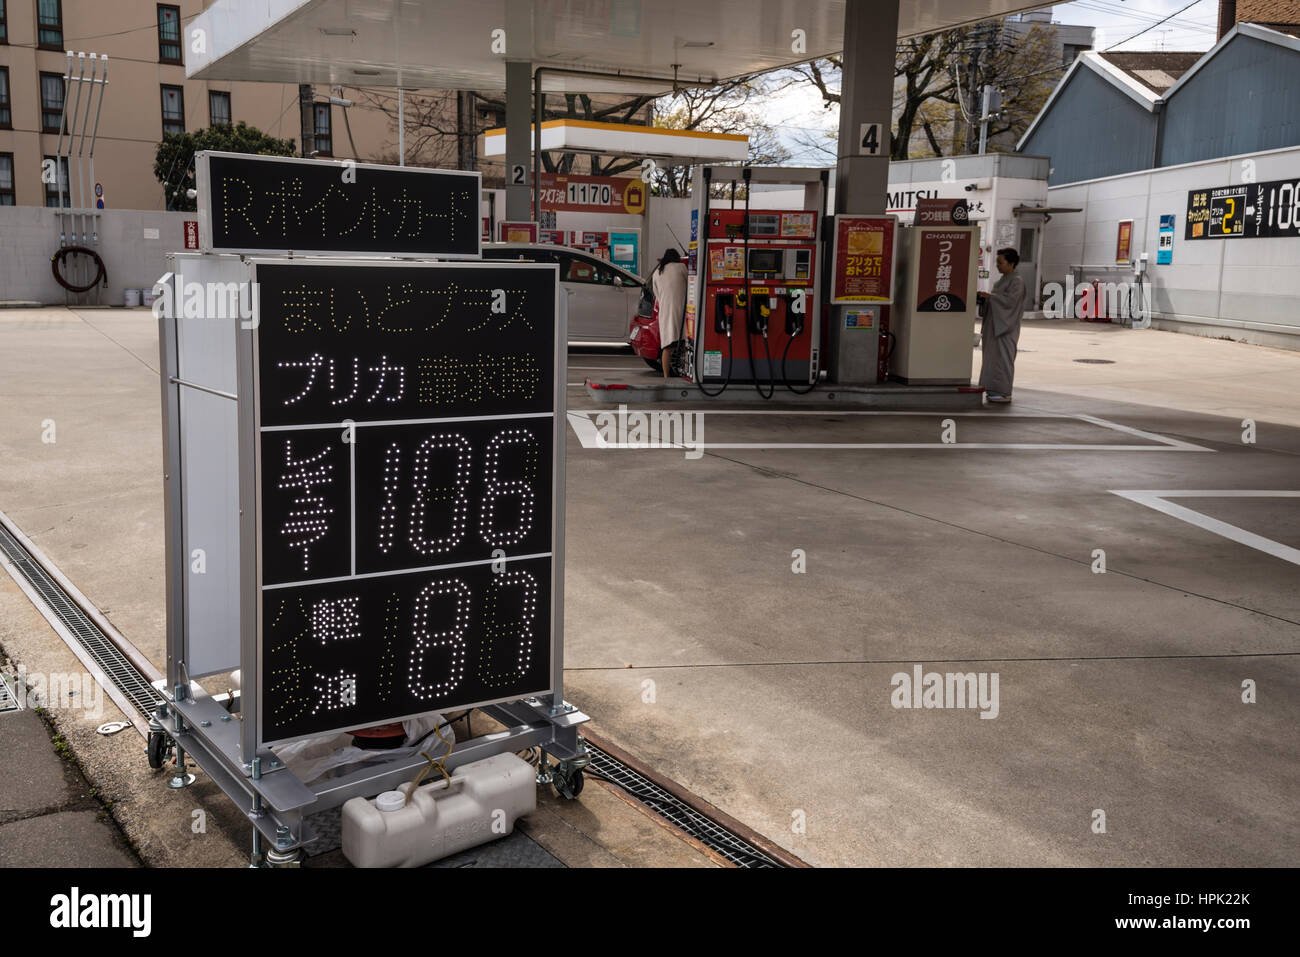 A petrol station with a electronic display of fuel prices in Kyoto, Japan Stock Photo